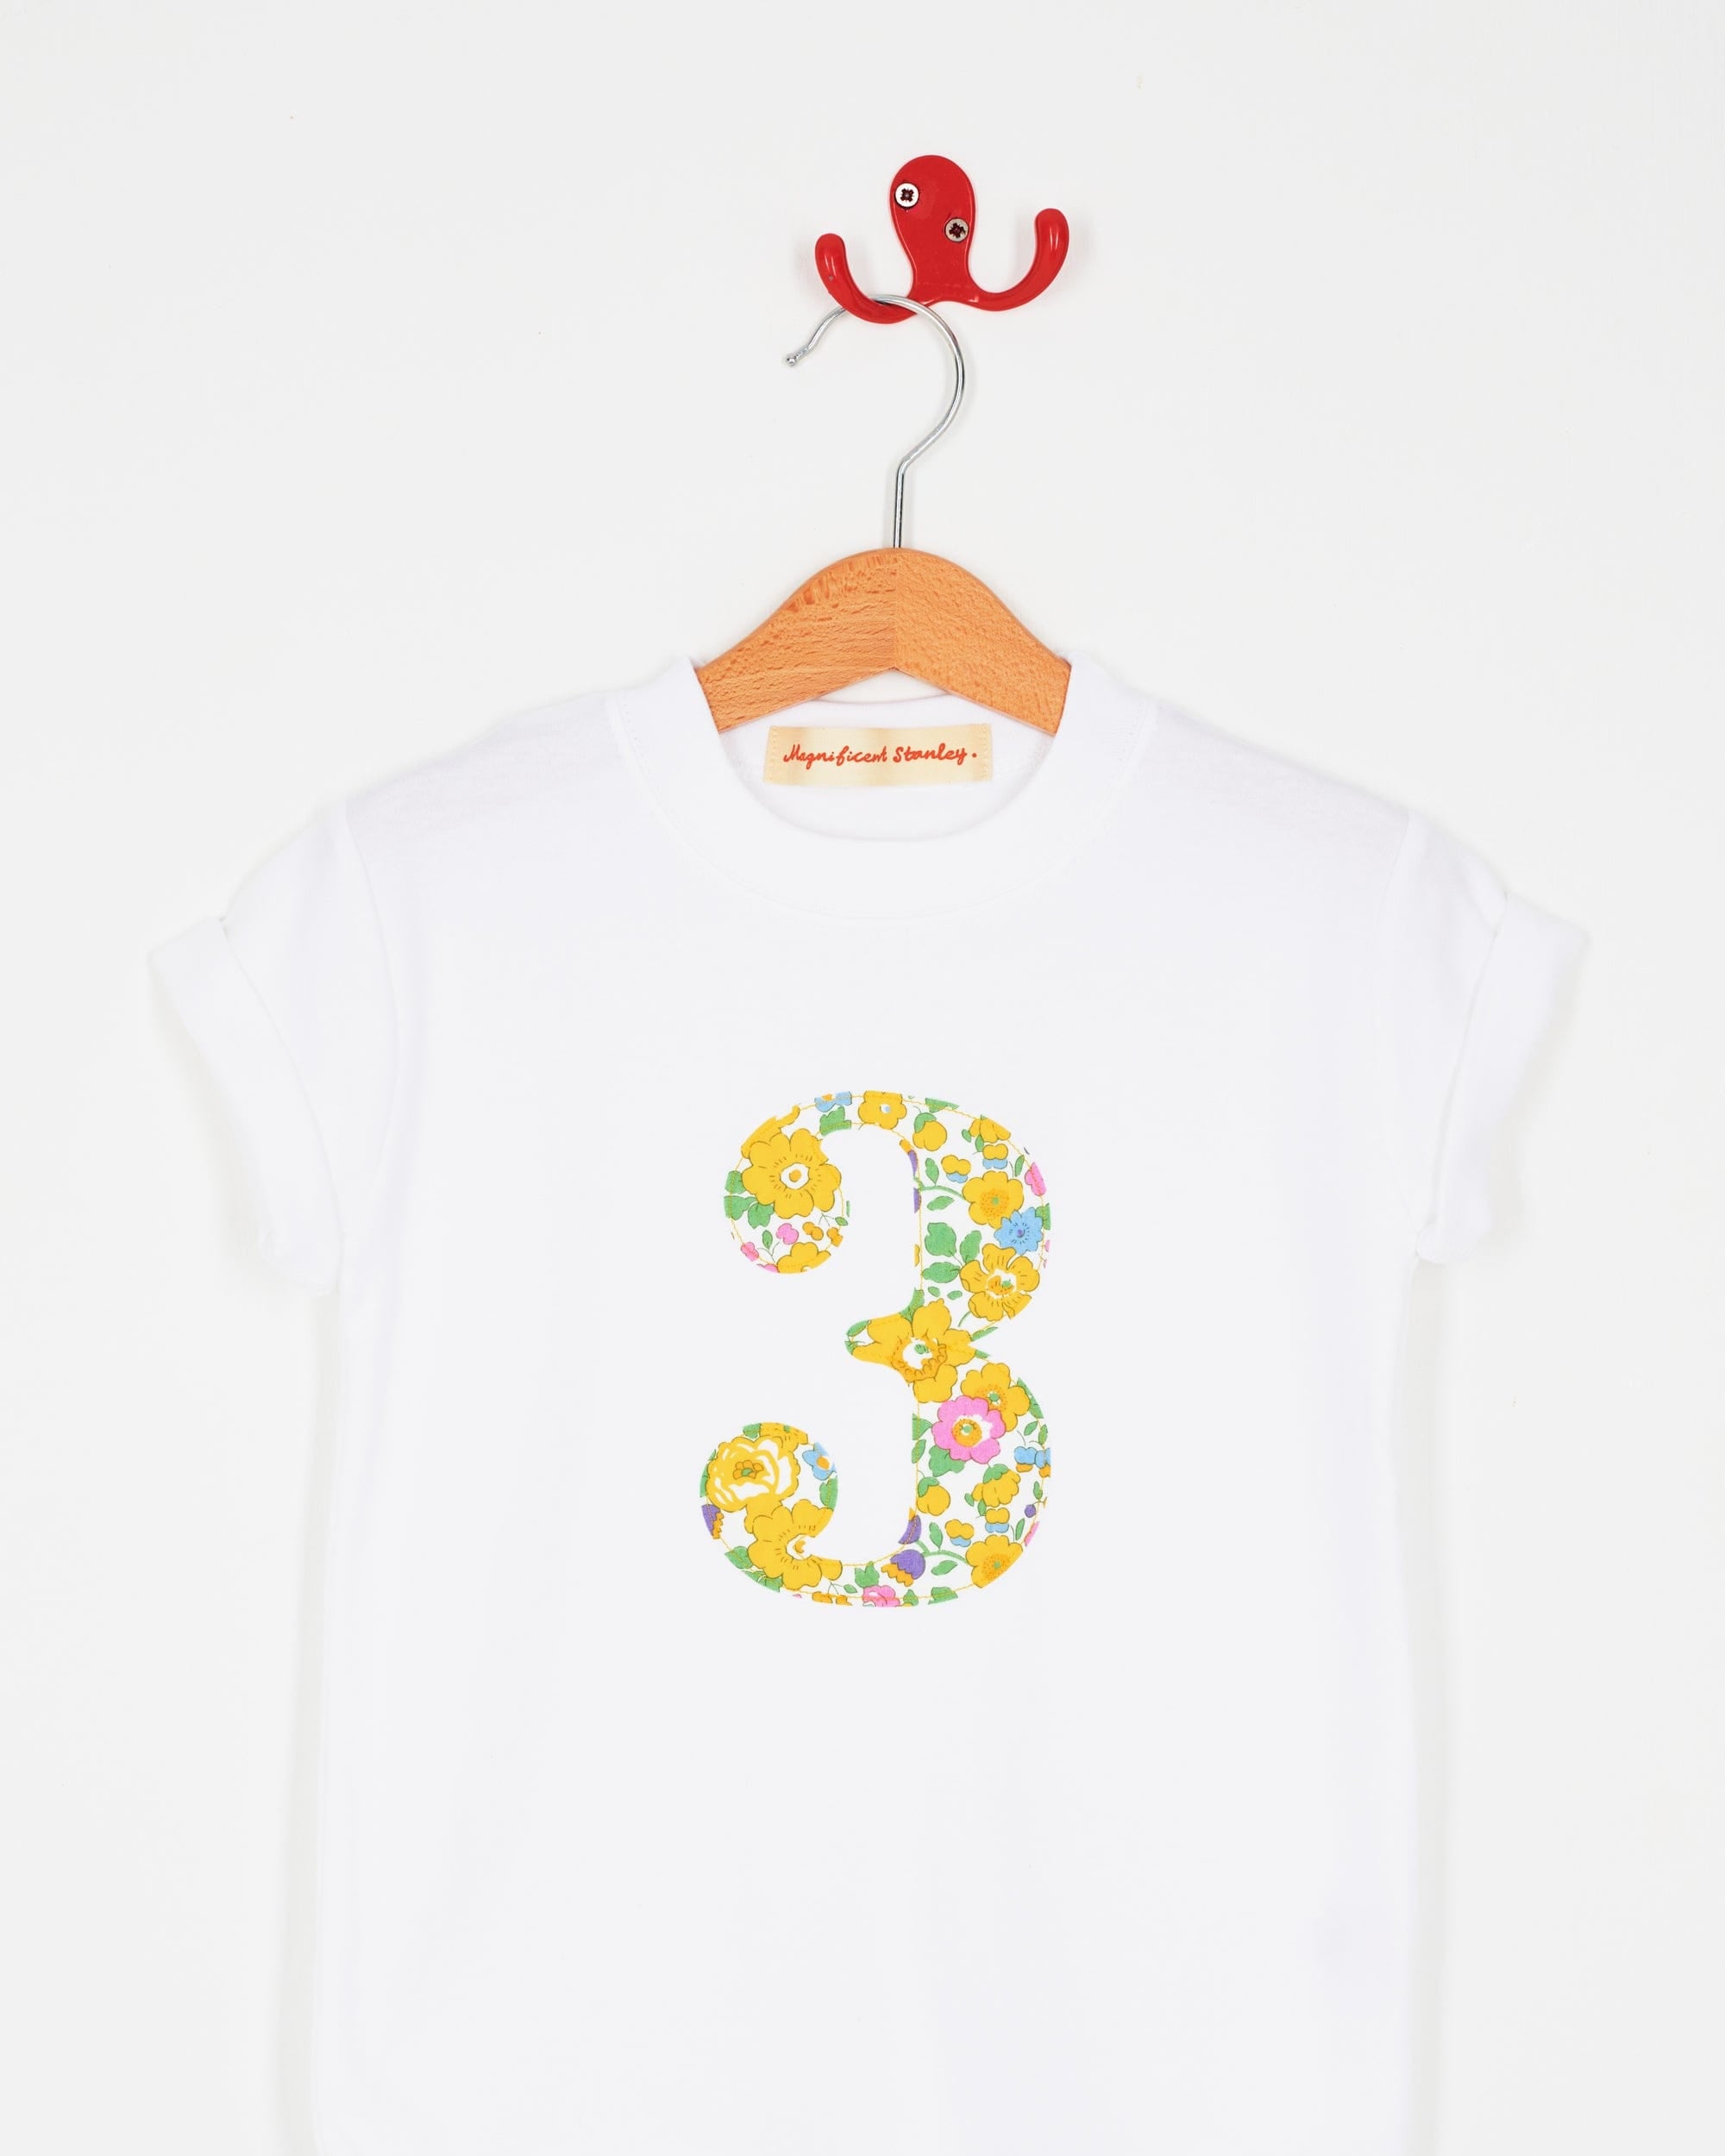 Magnificent Stanley Tee Number White T-Shirt in Betsy Yellow Liberty Print